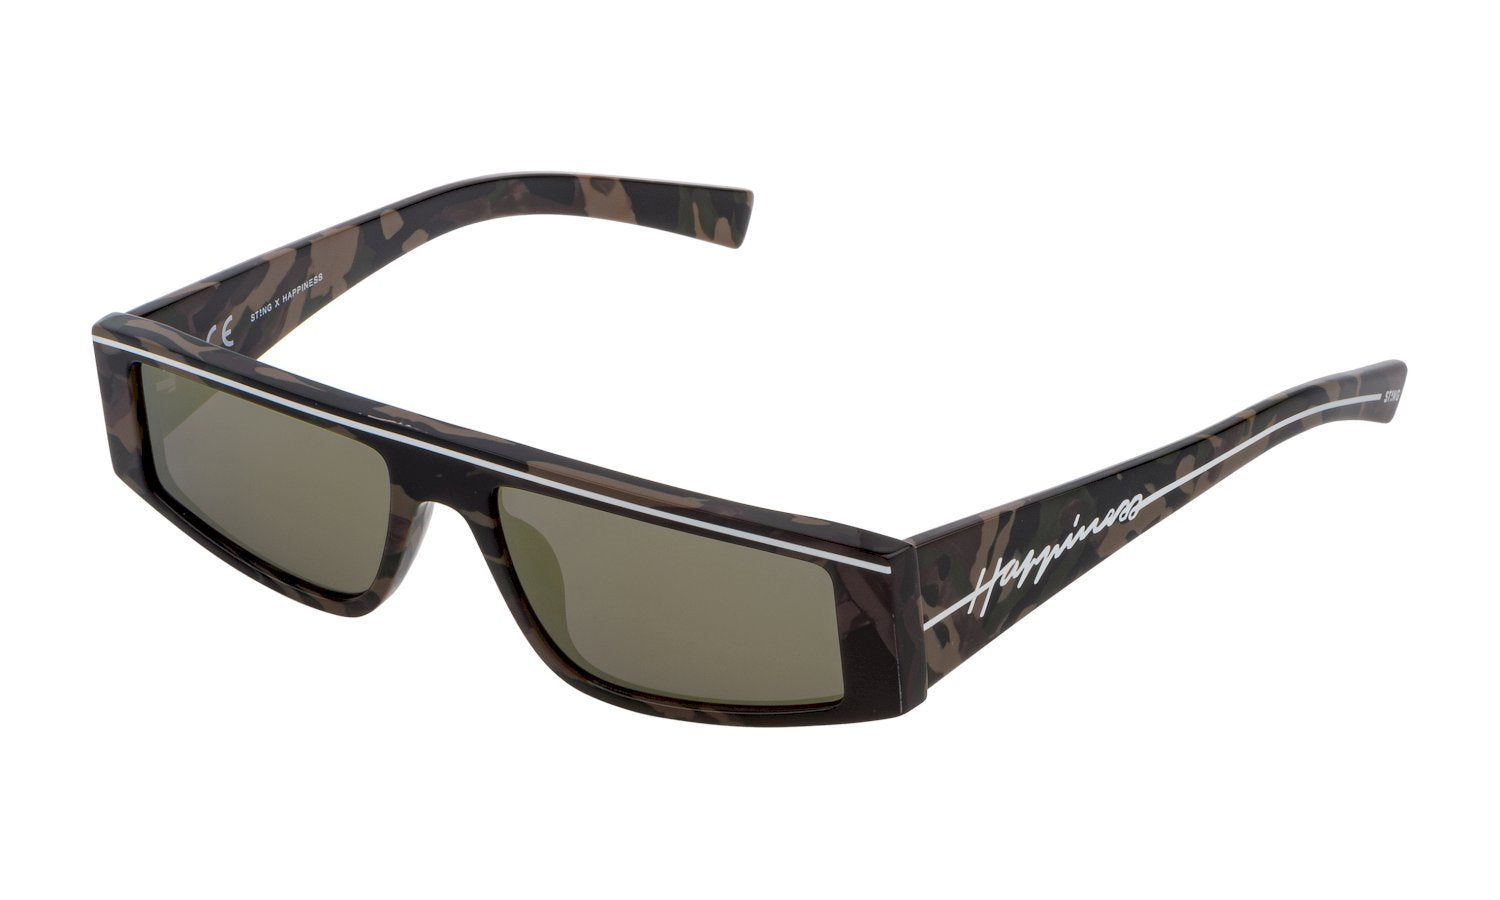 Color_VBVG - Camouflage Mimetic Green/brown/black